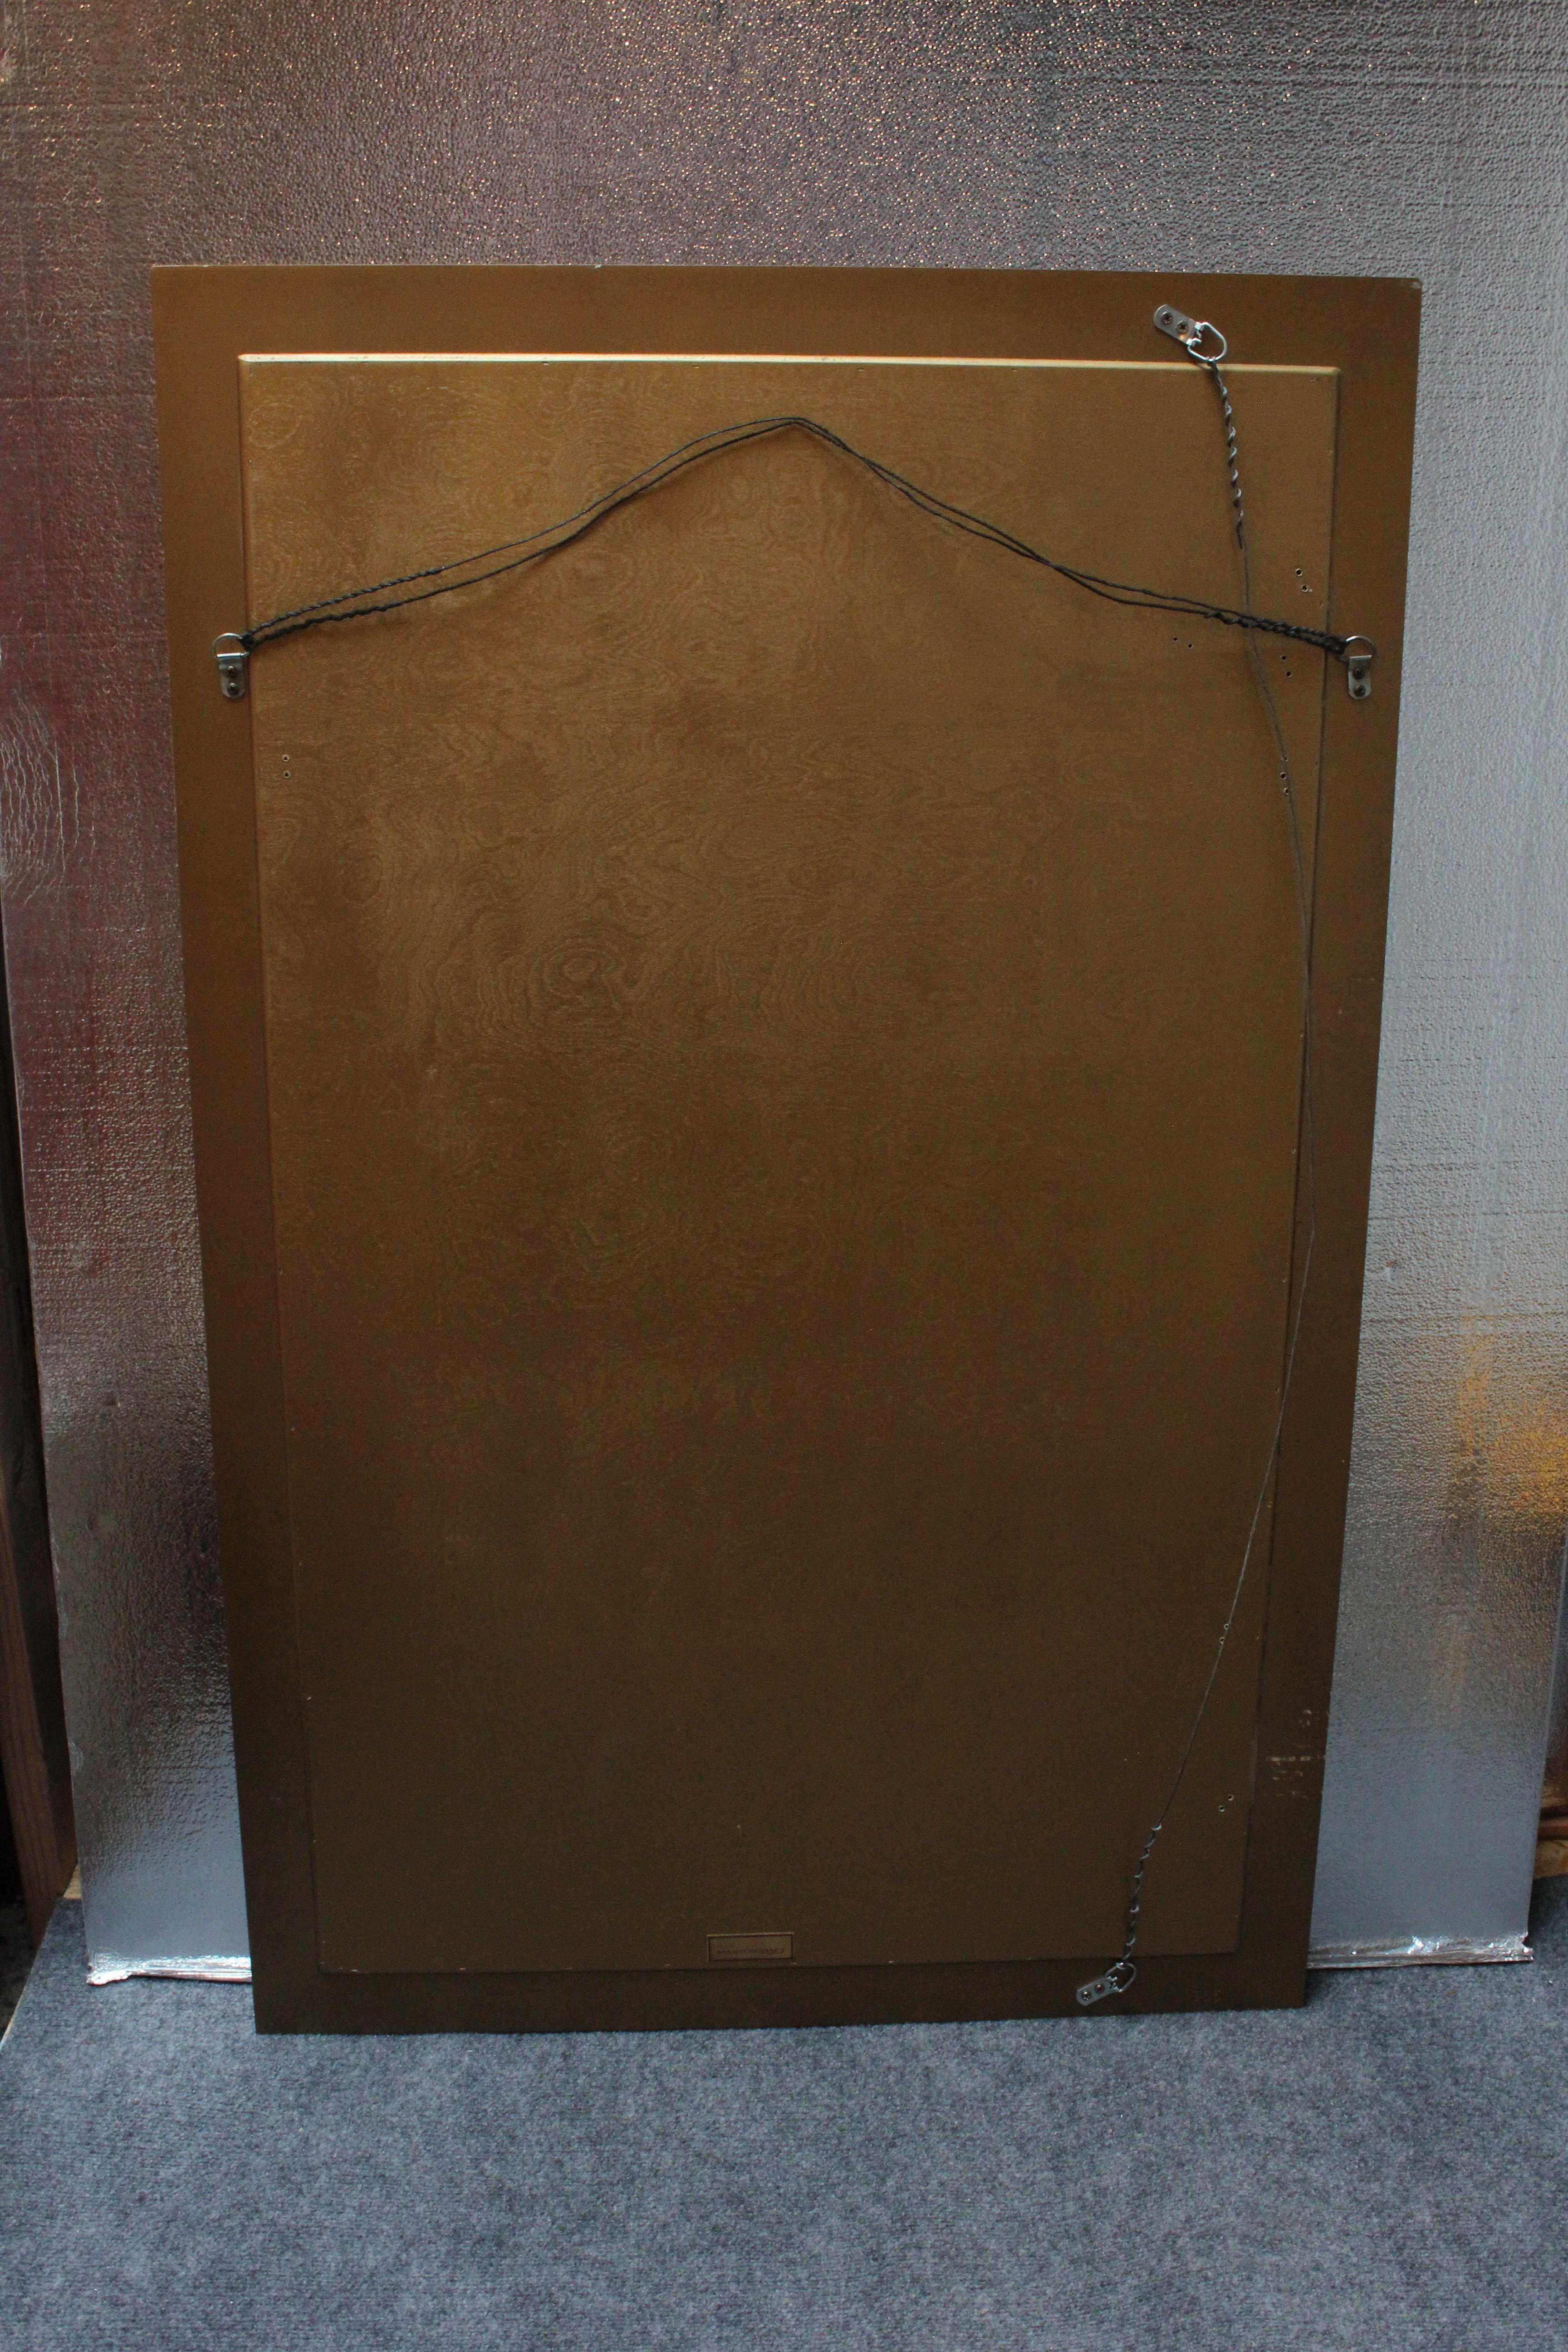 Hollywood Regency Vintage Acid-Etched Brass Wall Mirror by Bernhard Rohne for Mastercraft For Sale